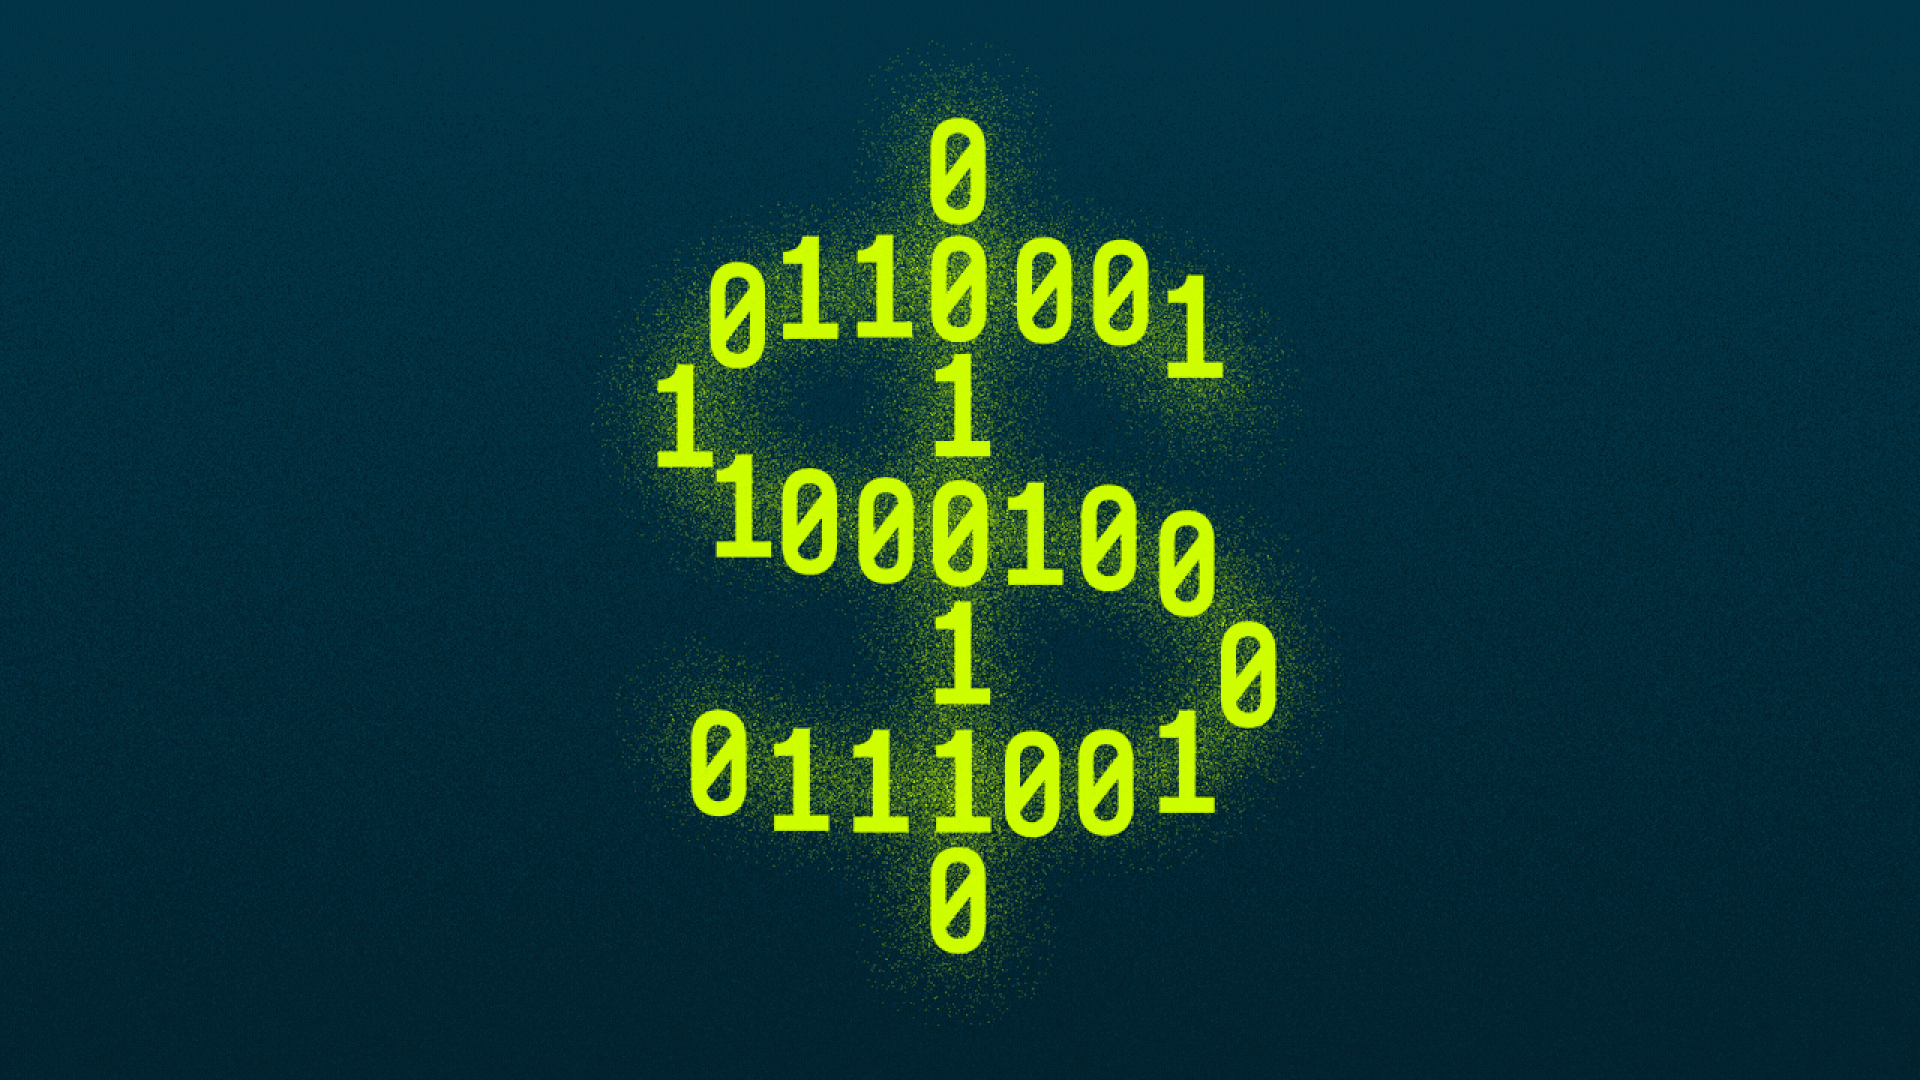 Illustration of a dollar sign made of binary code changing into a checkmark made of binary code.